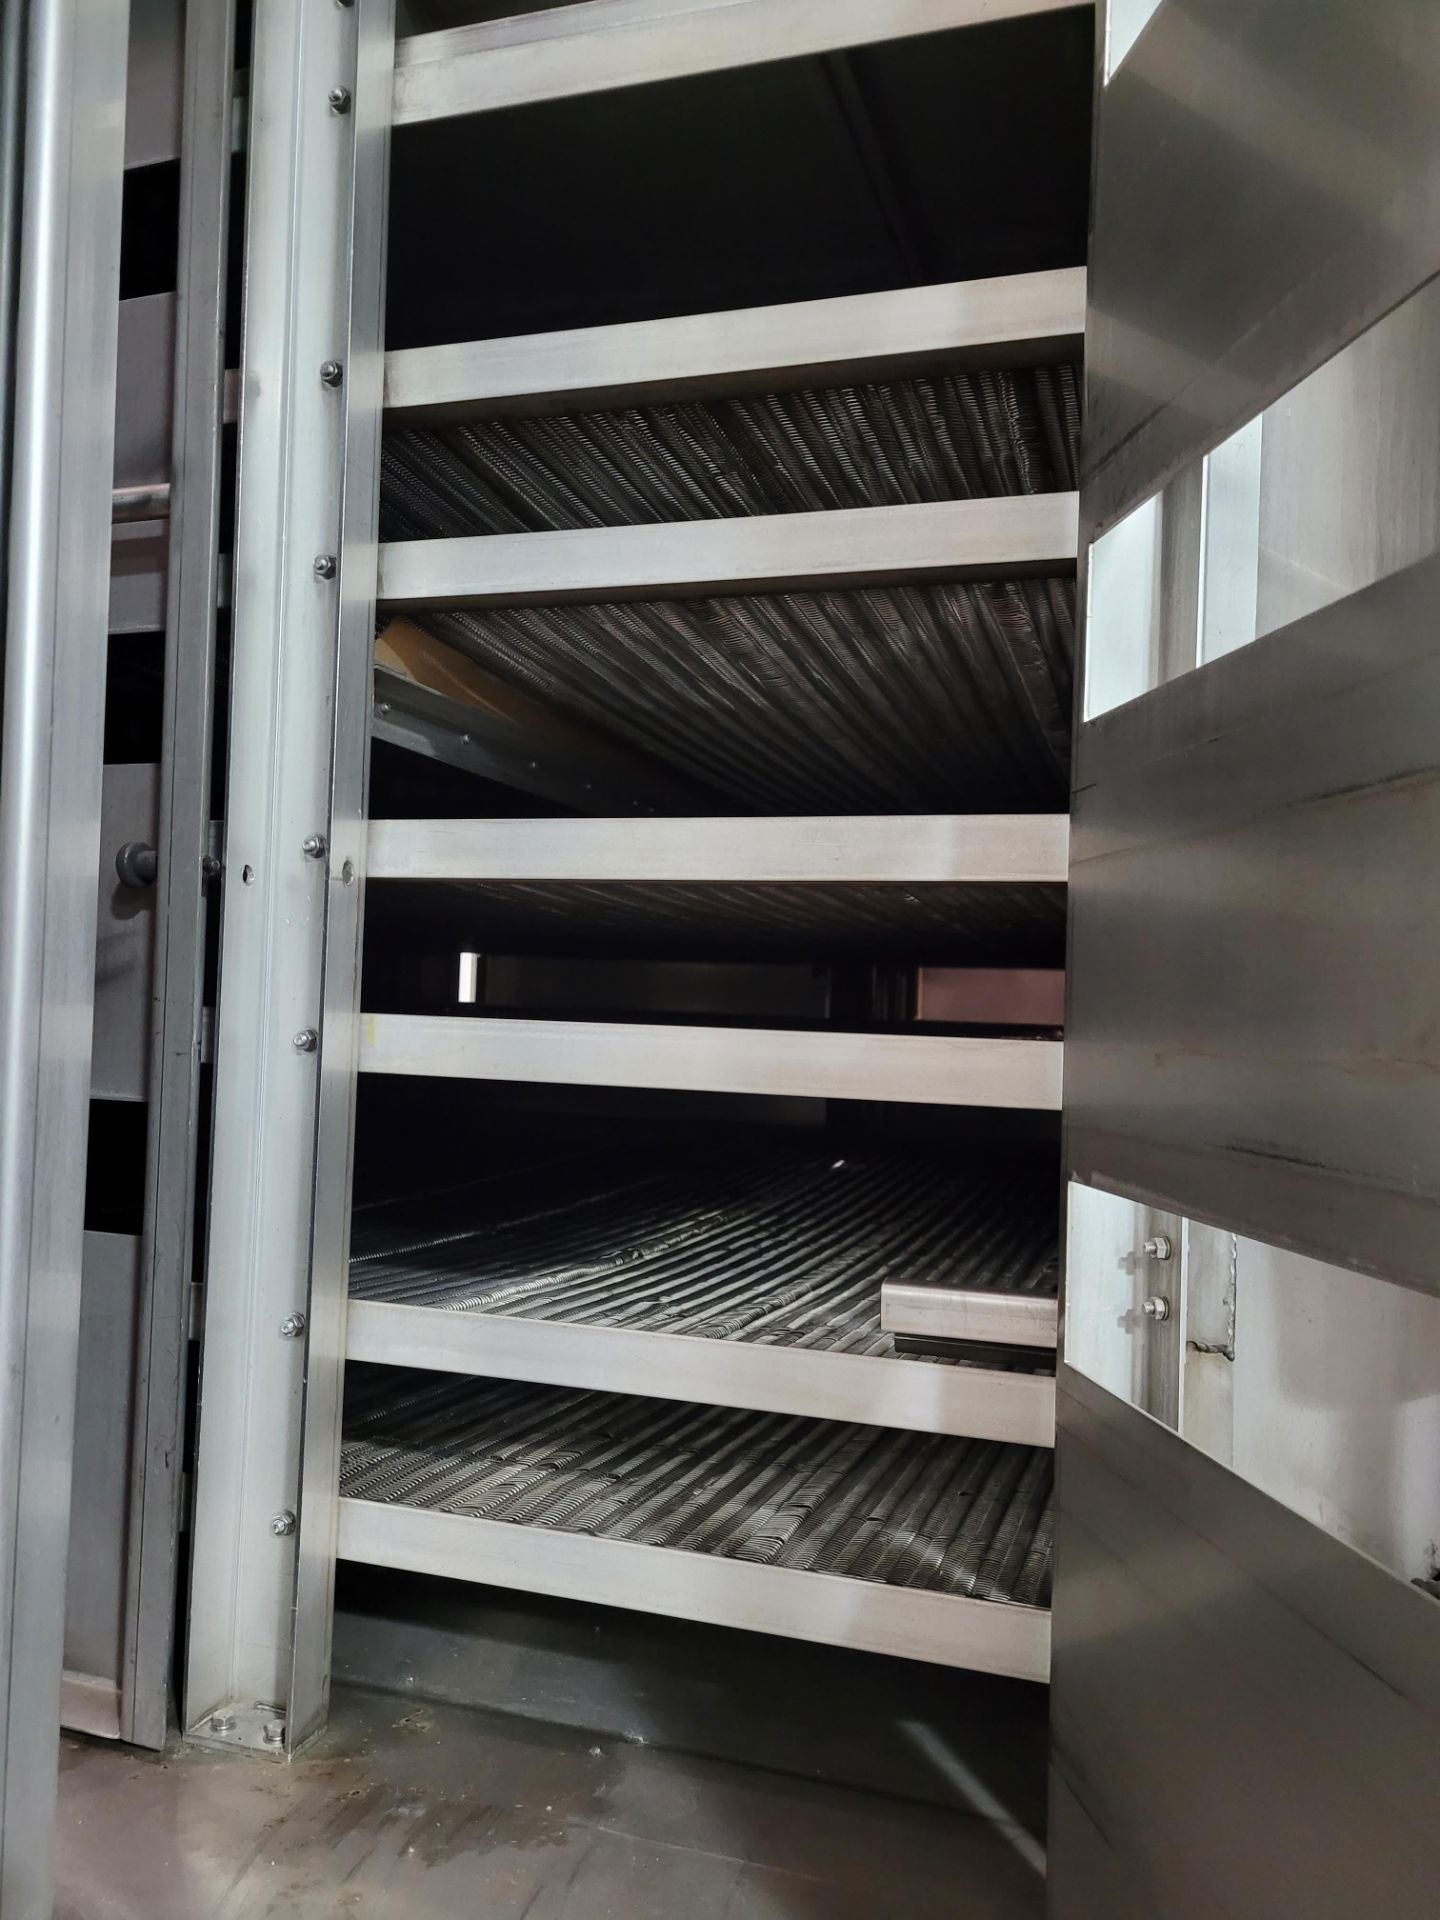 PASTA TECHNOLOGIES GROUP 3-Tier conveyor dryer Mod. INT-40-3-15, S/N 005081102 including temp and - Image 6 of 7